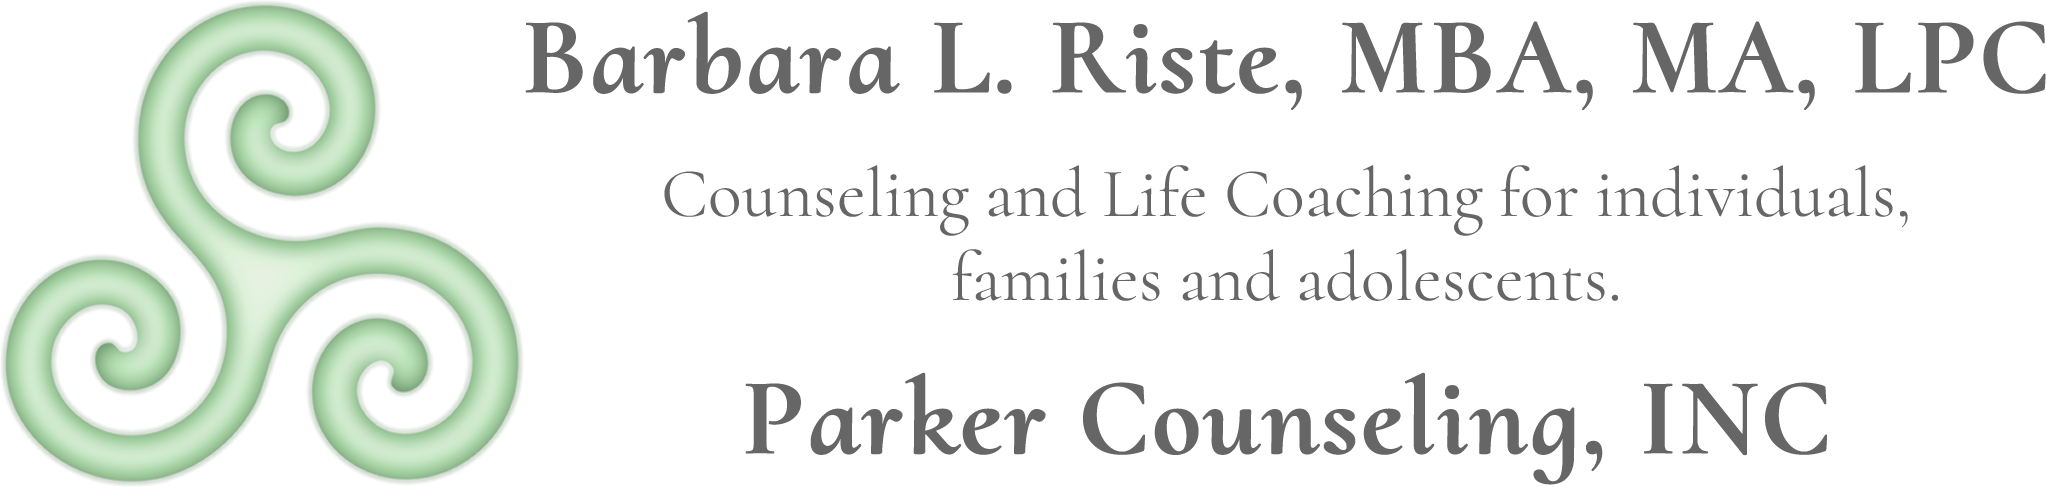 Parker Counseling, Inc.